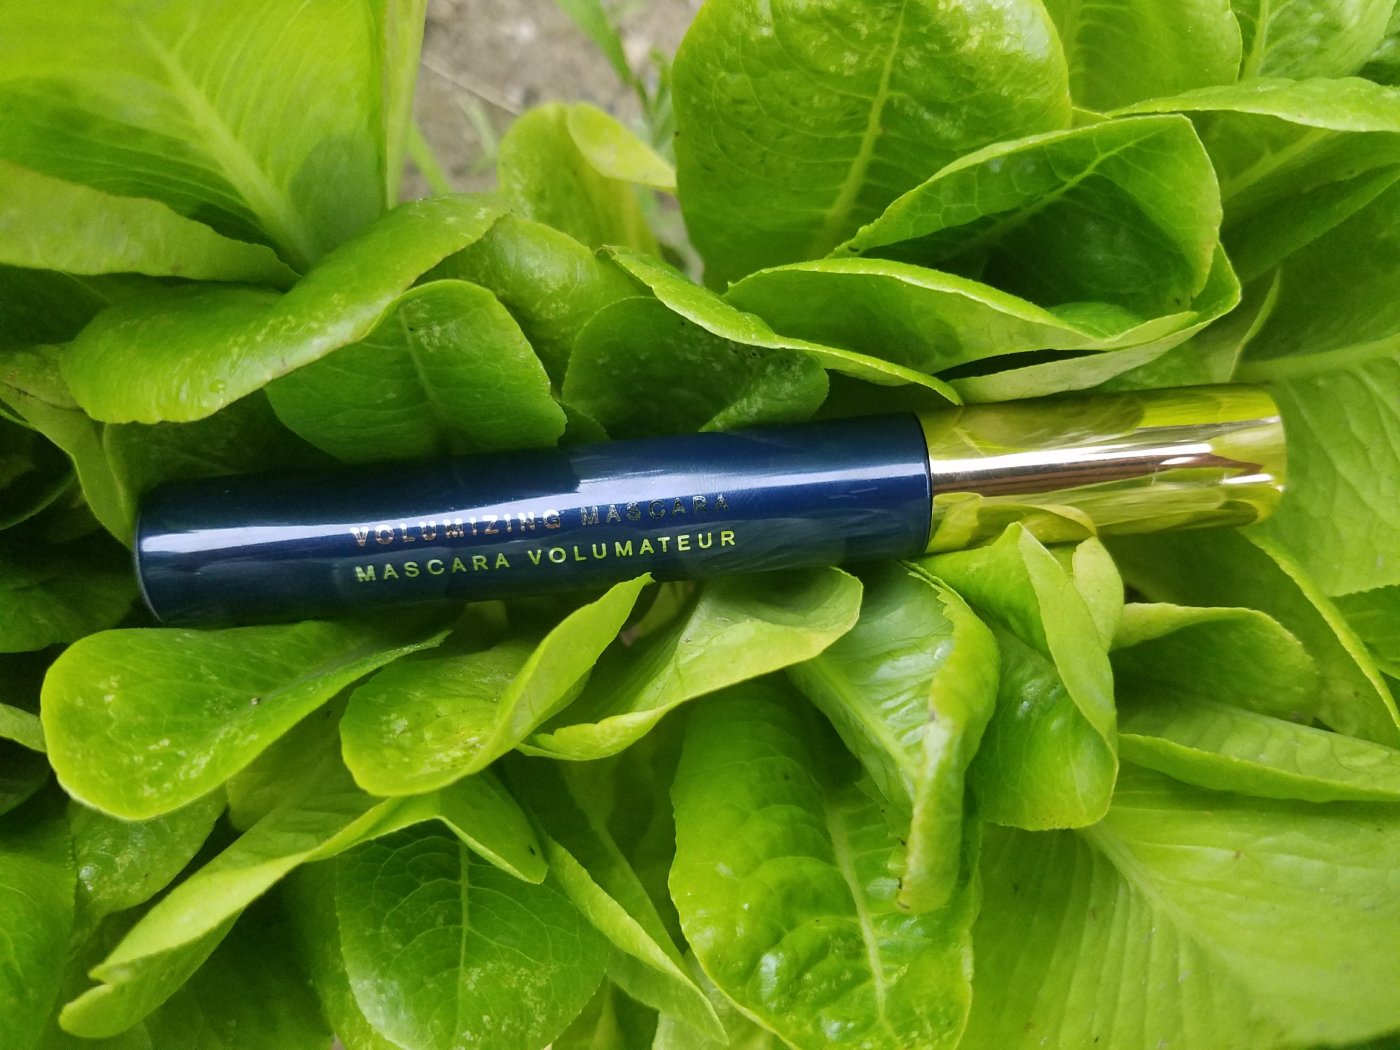 Better Beauty Vermont New Volumizing Mascara- now there are no more excuses- it's time to Switch to Safer